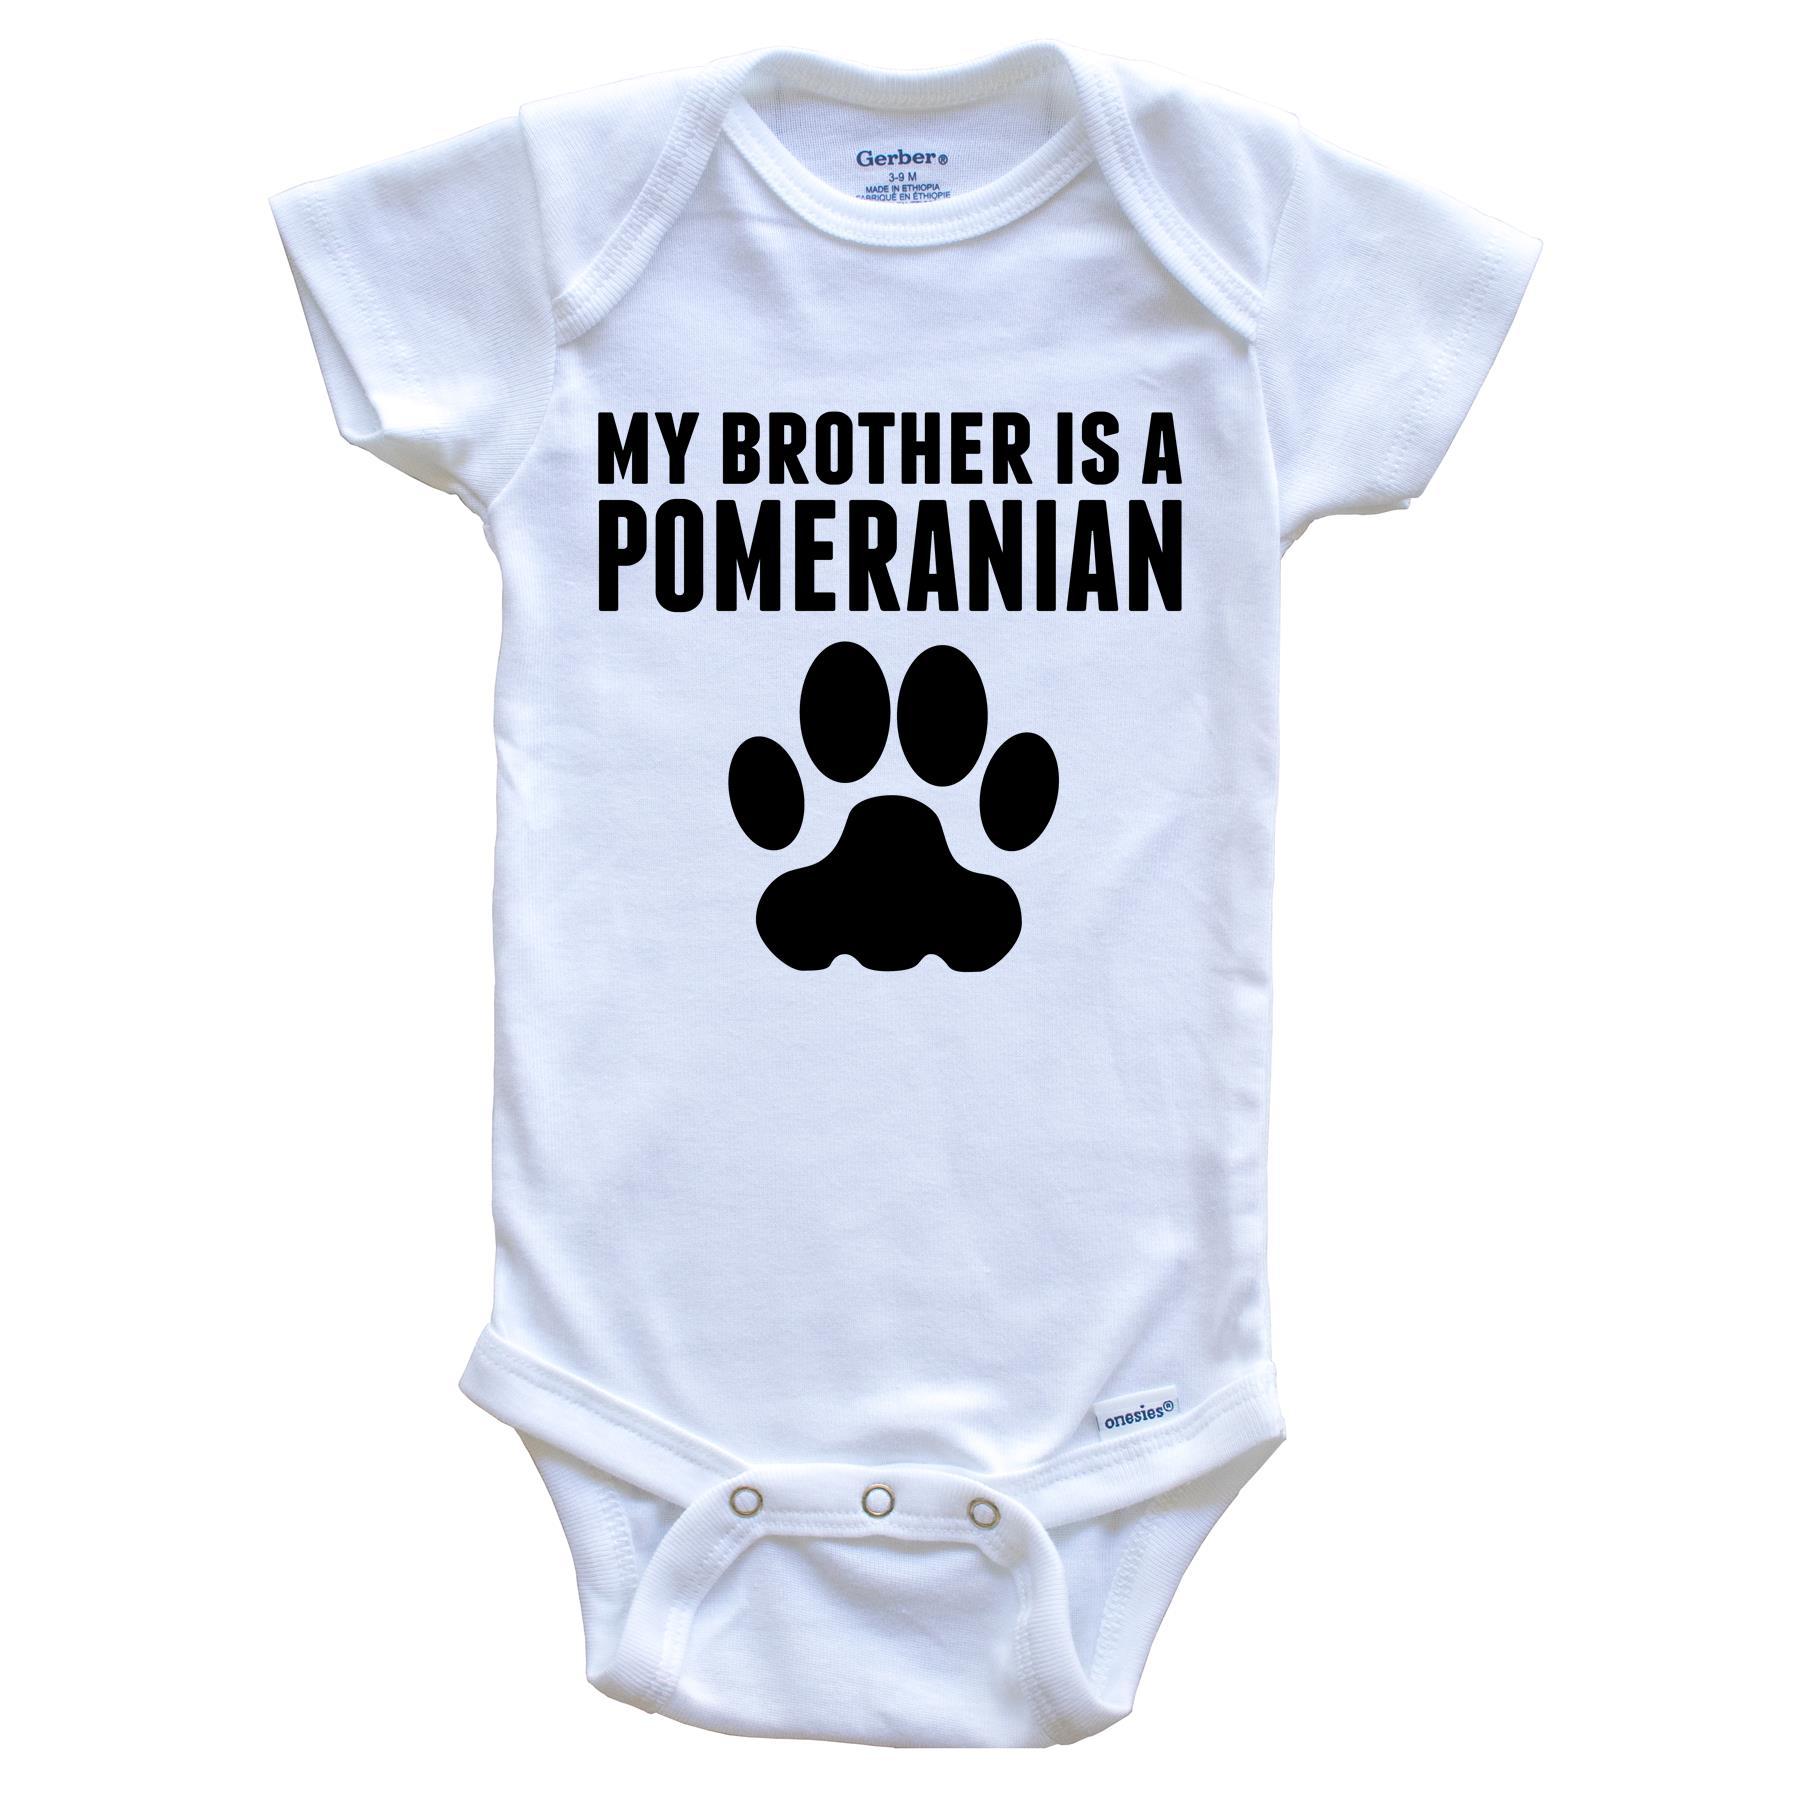 My Brother Is A Pomeranian Baby Onesie